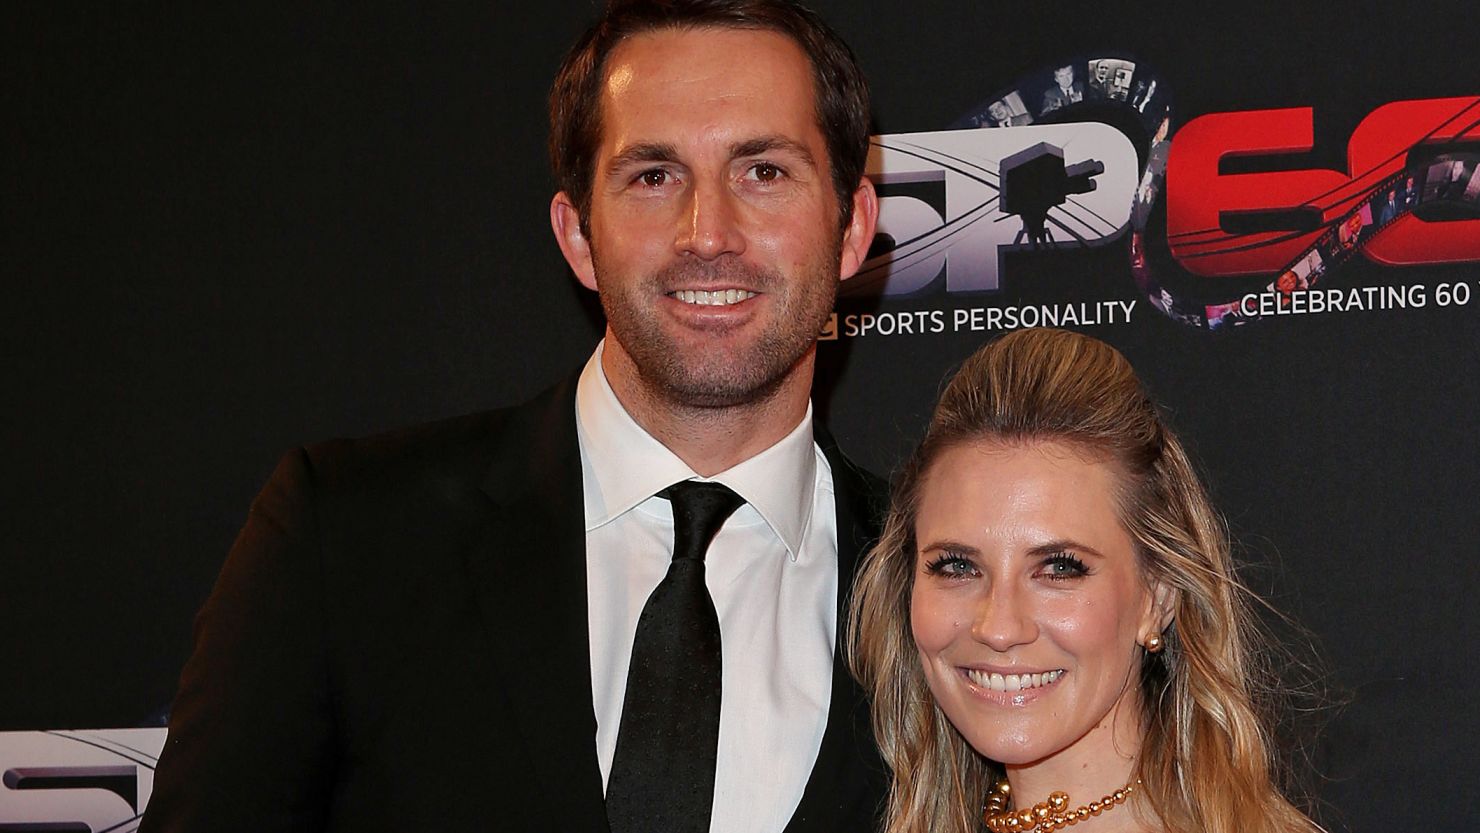 Ben Ainslie was on honeymoon with his wife Georgie Thompson in the Caribbean when his boat hit trouble.